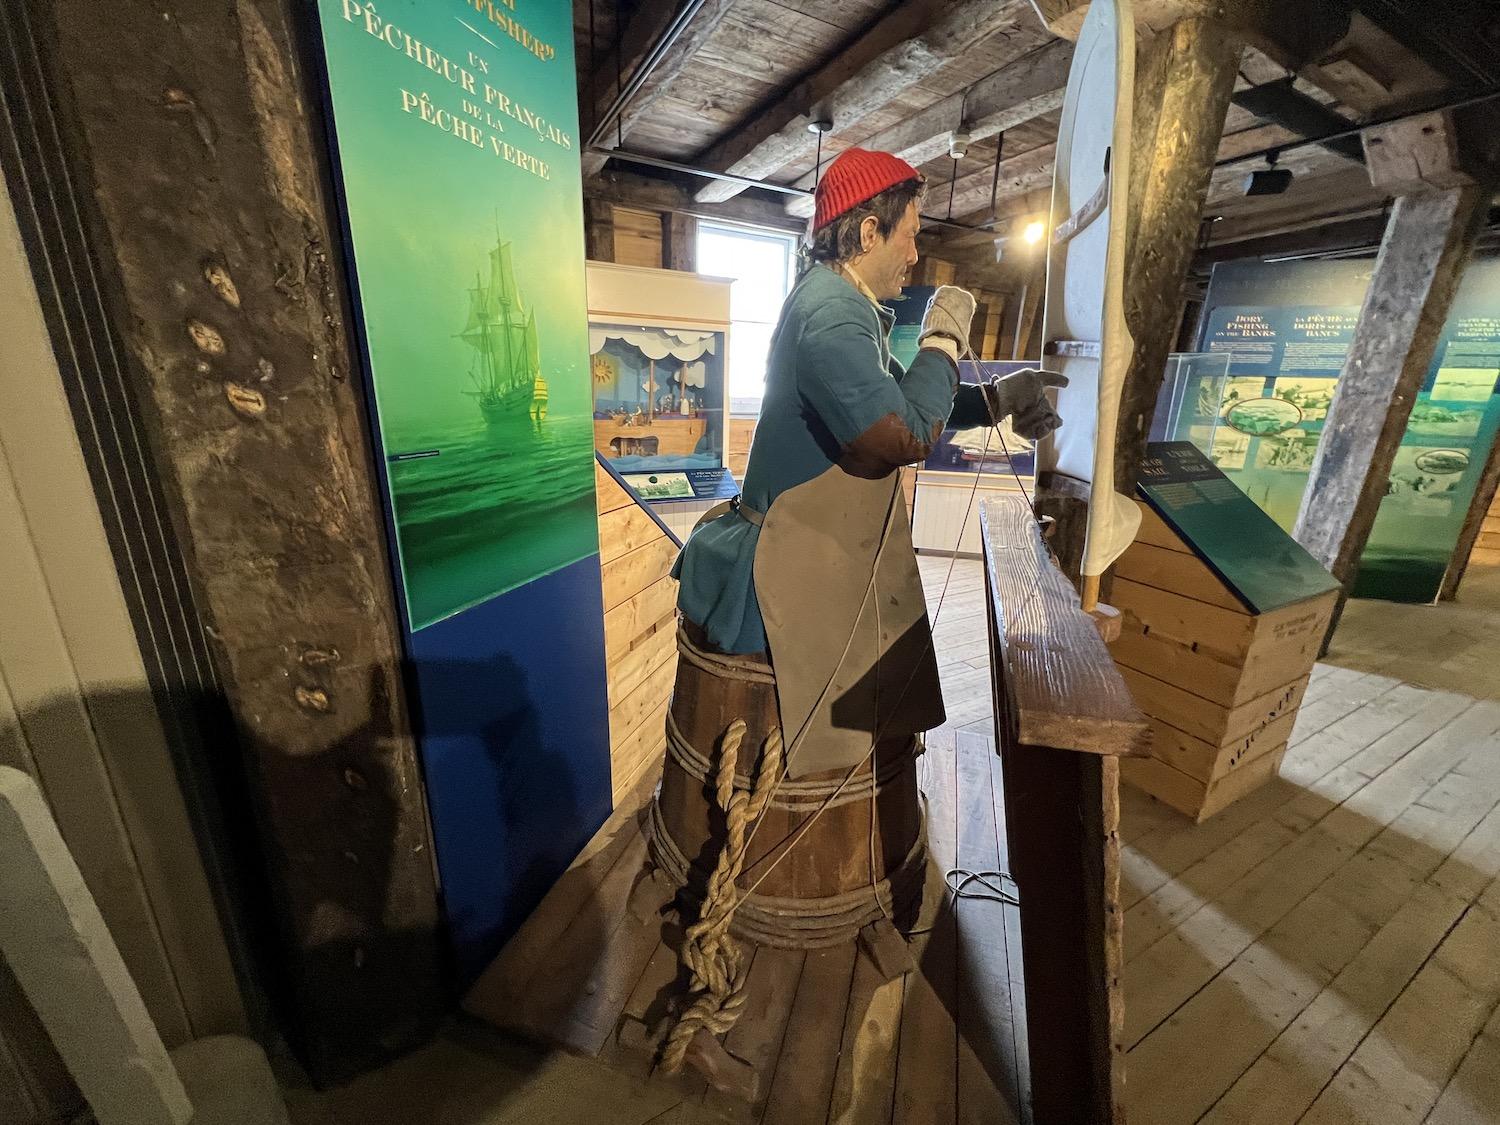 At Ryan Premises National Historic Site, you can see how the French once fished for cod with handlines and baited hooks while standing in wooden barrels to stay dry.